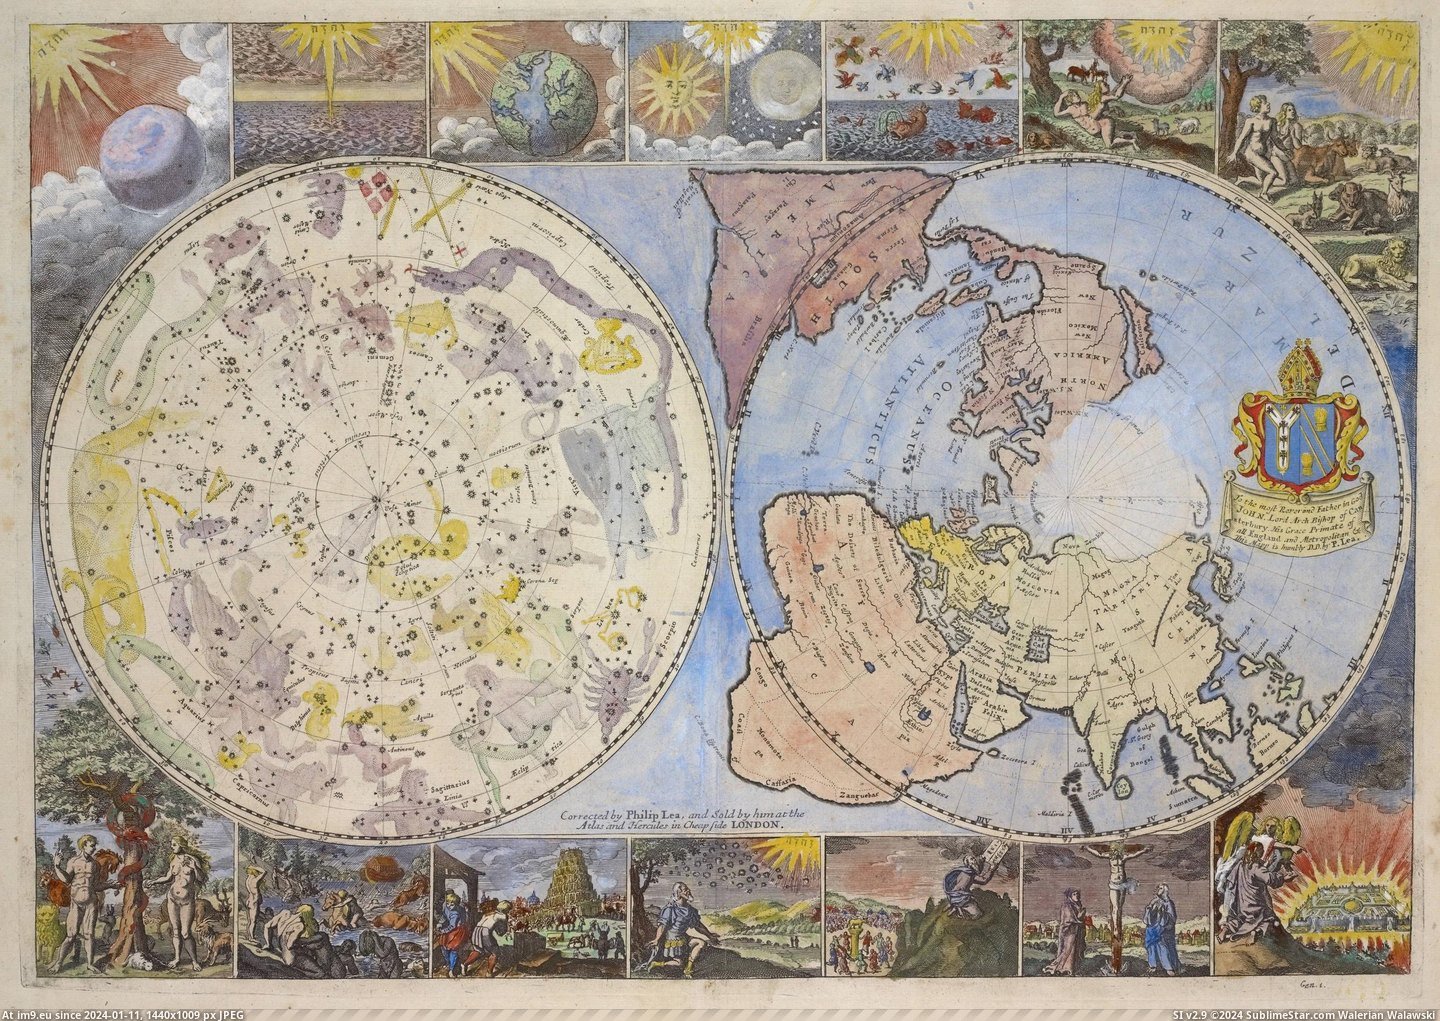 #World #Map #Earth #Pole #Heavens #Showing #North [Mapporn] 'Map of the heavens and the earth,' 1699 - A map showing the round world centered at the North Pole [2477x1747] Pic. (Image of album My r/MAPS favs))